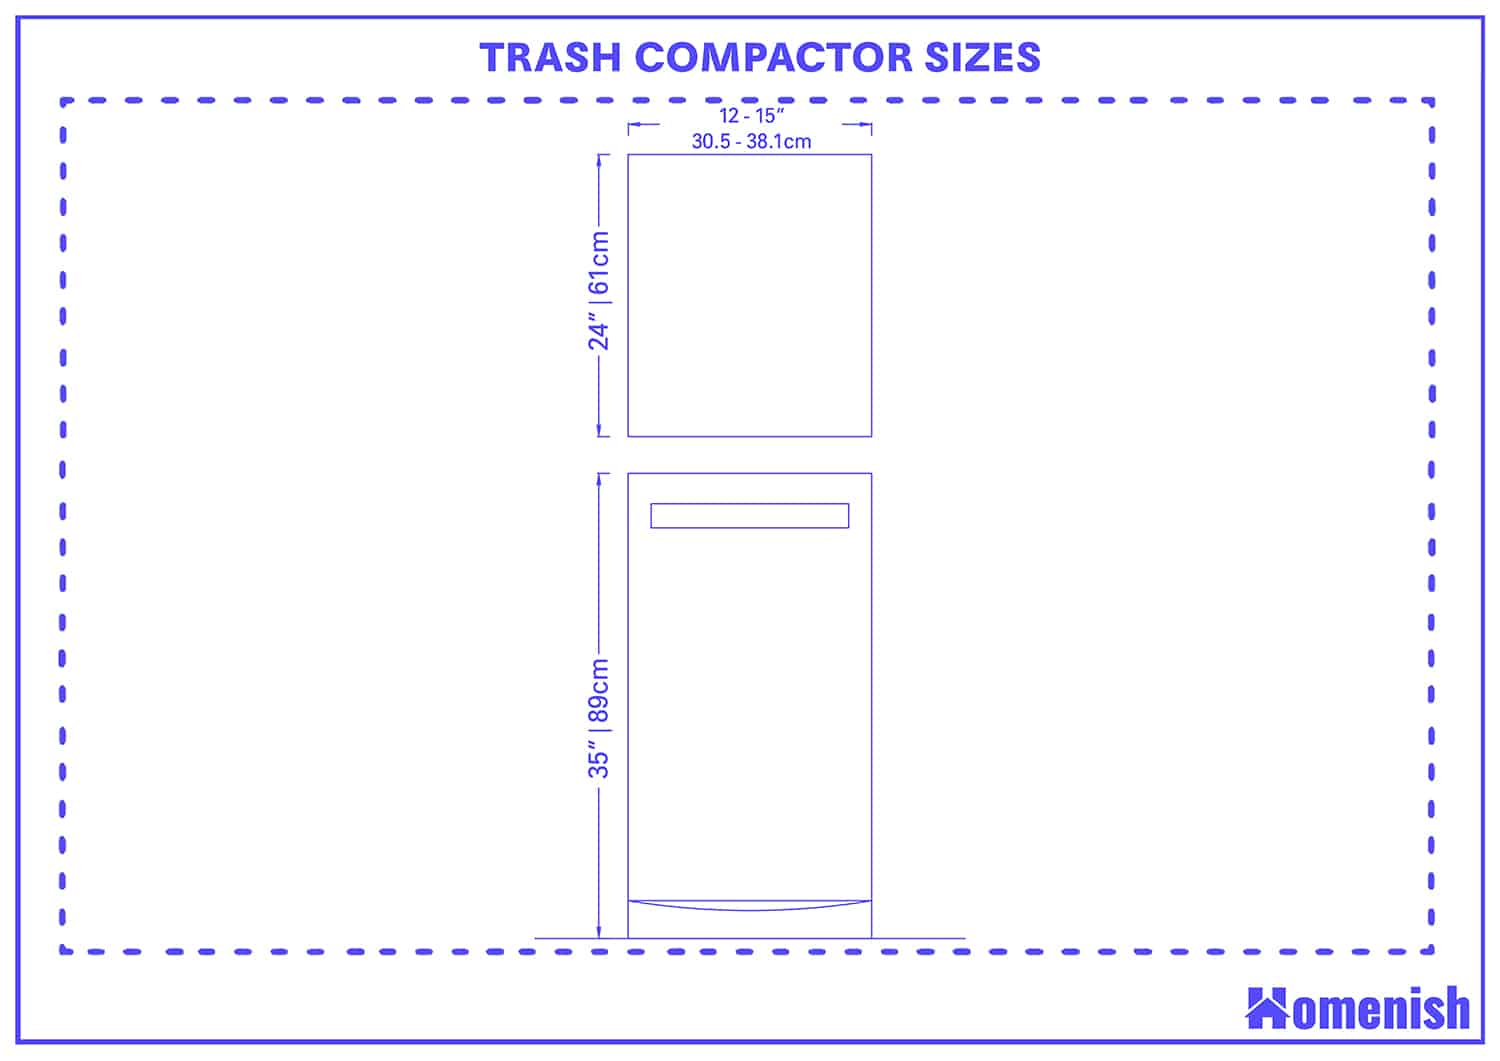 trash compactor sizes